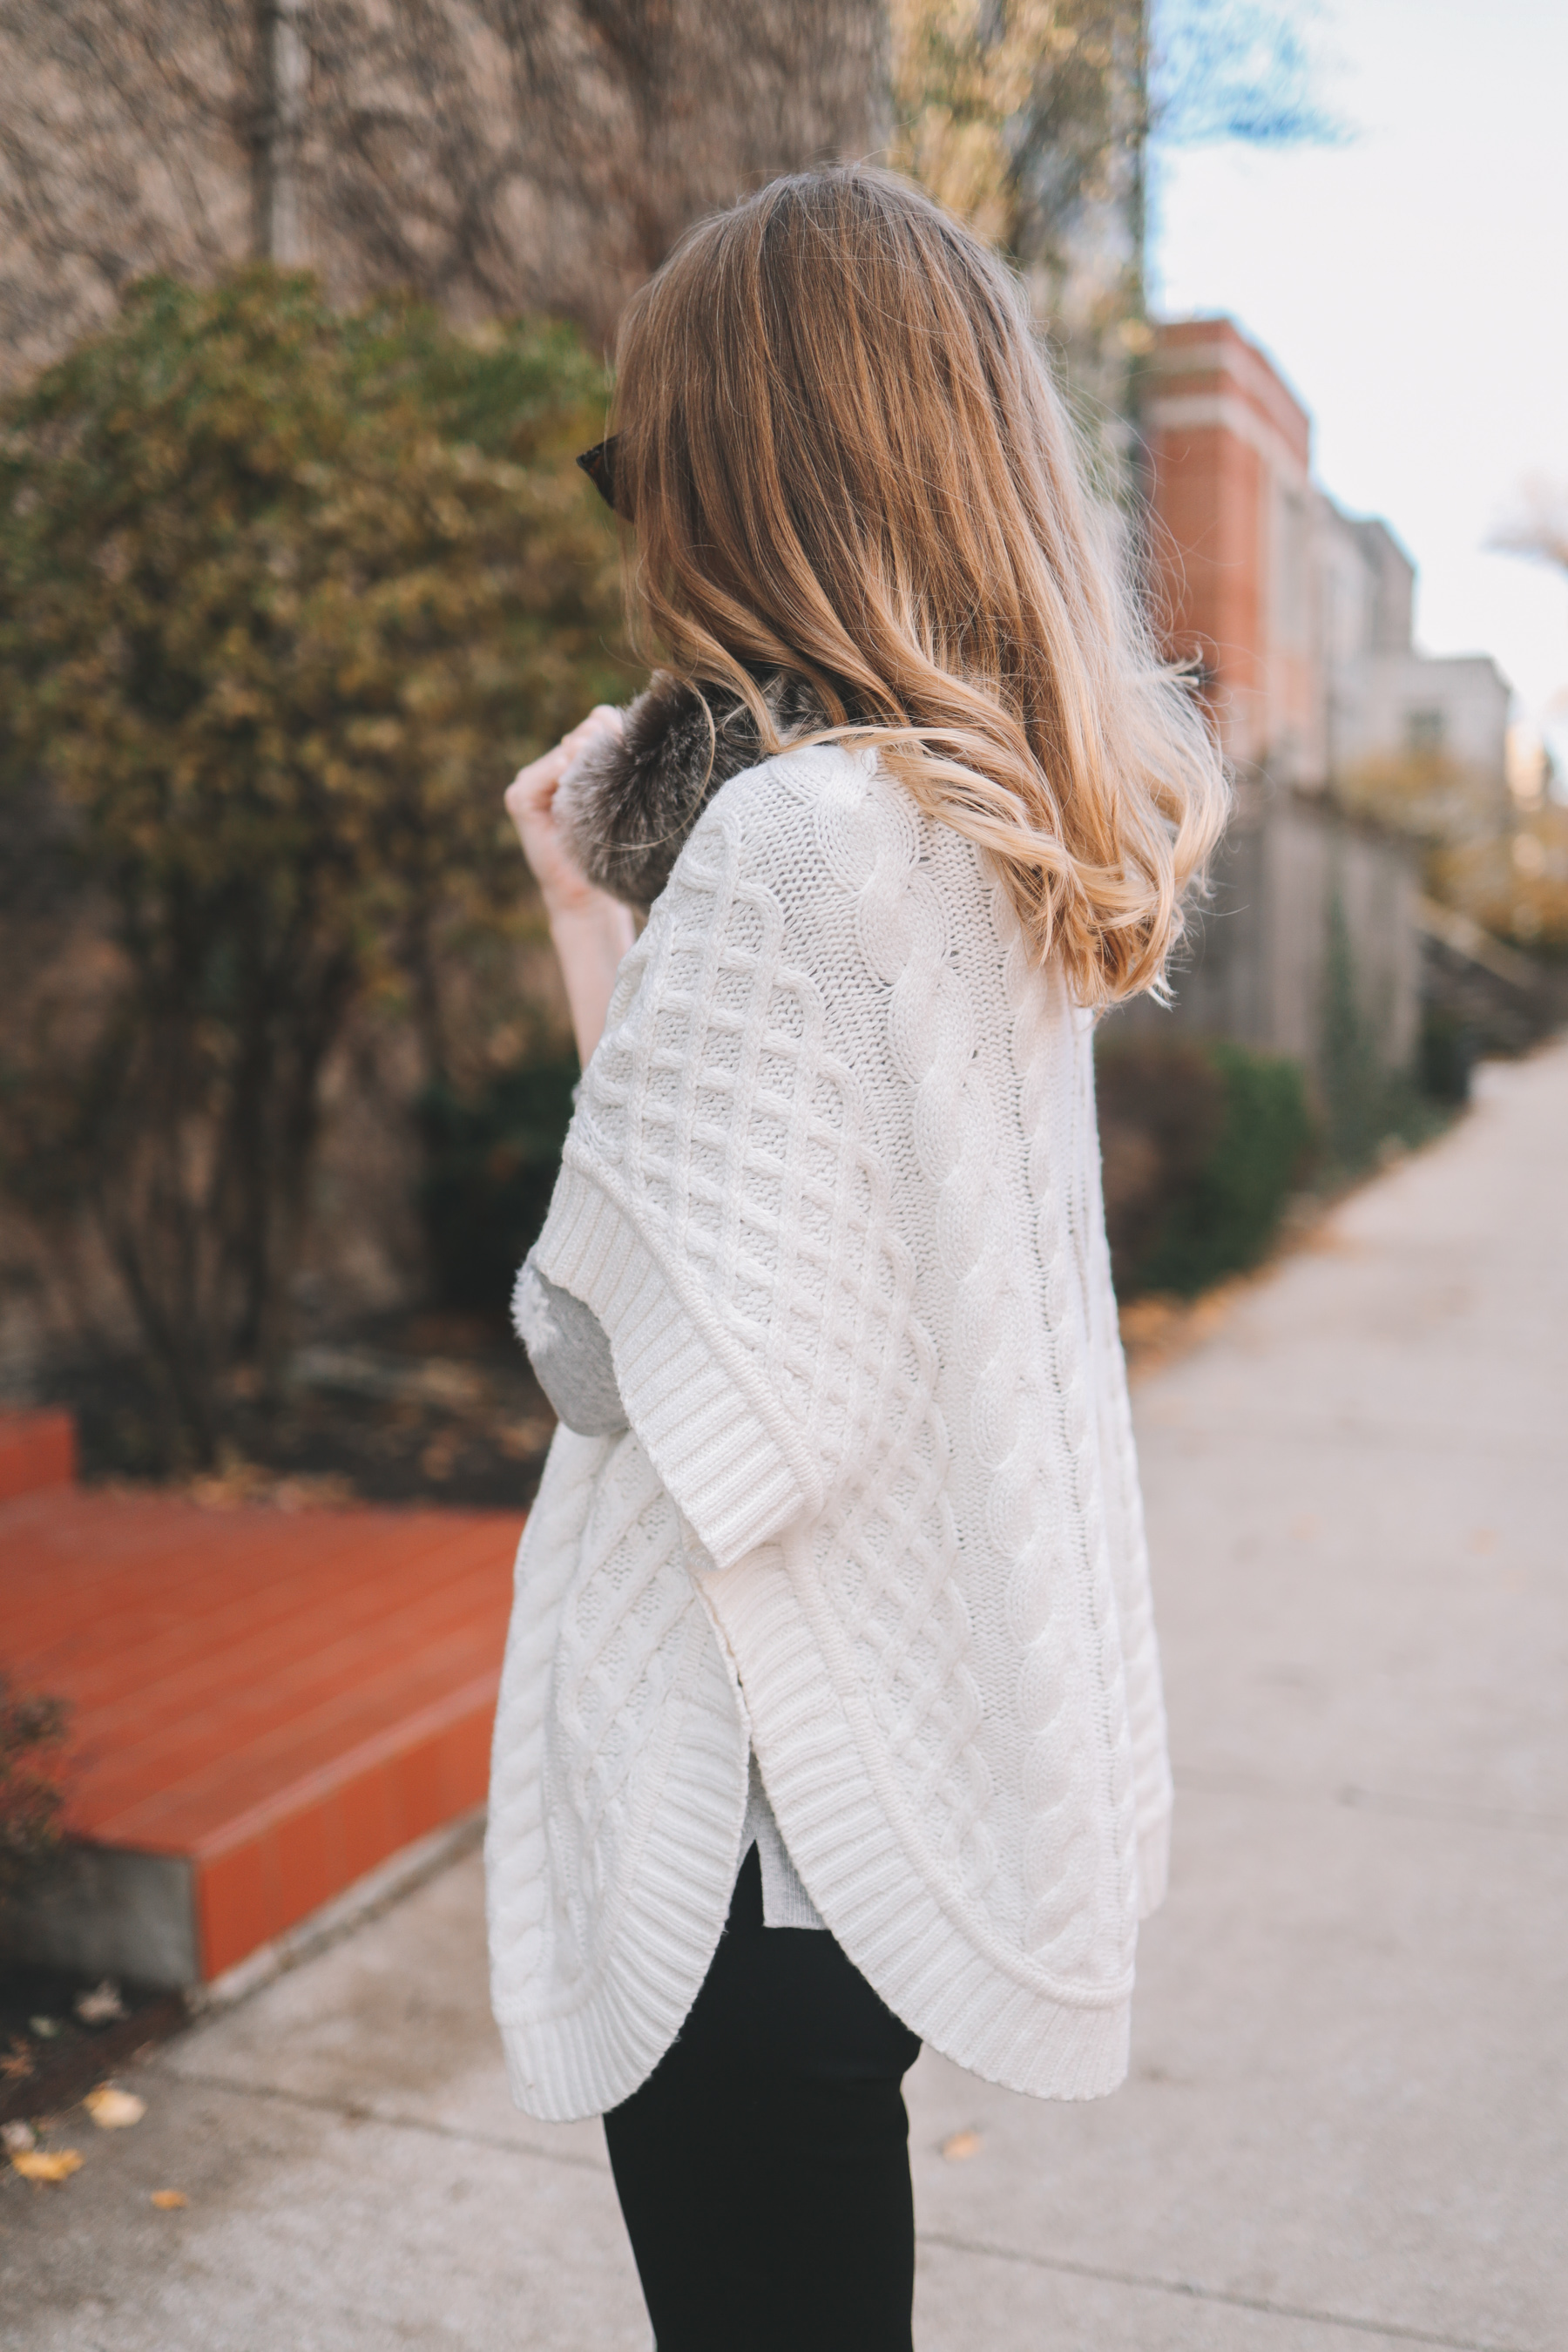 Cable-Knit Poncho